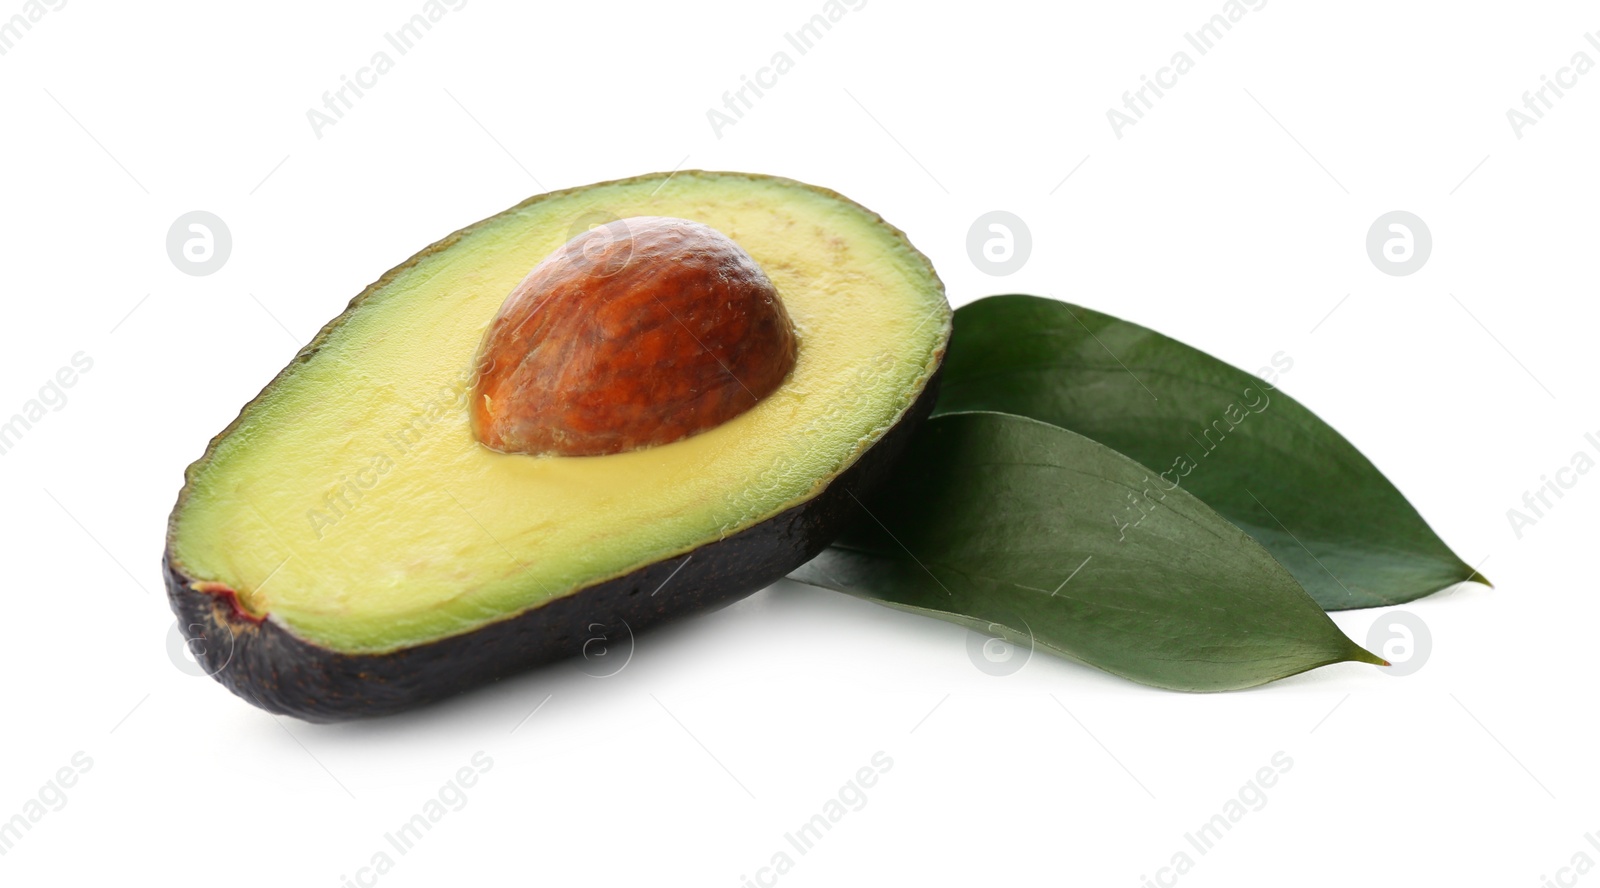 Photo of Half of ripe avocado with pit and green leaves on white background